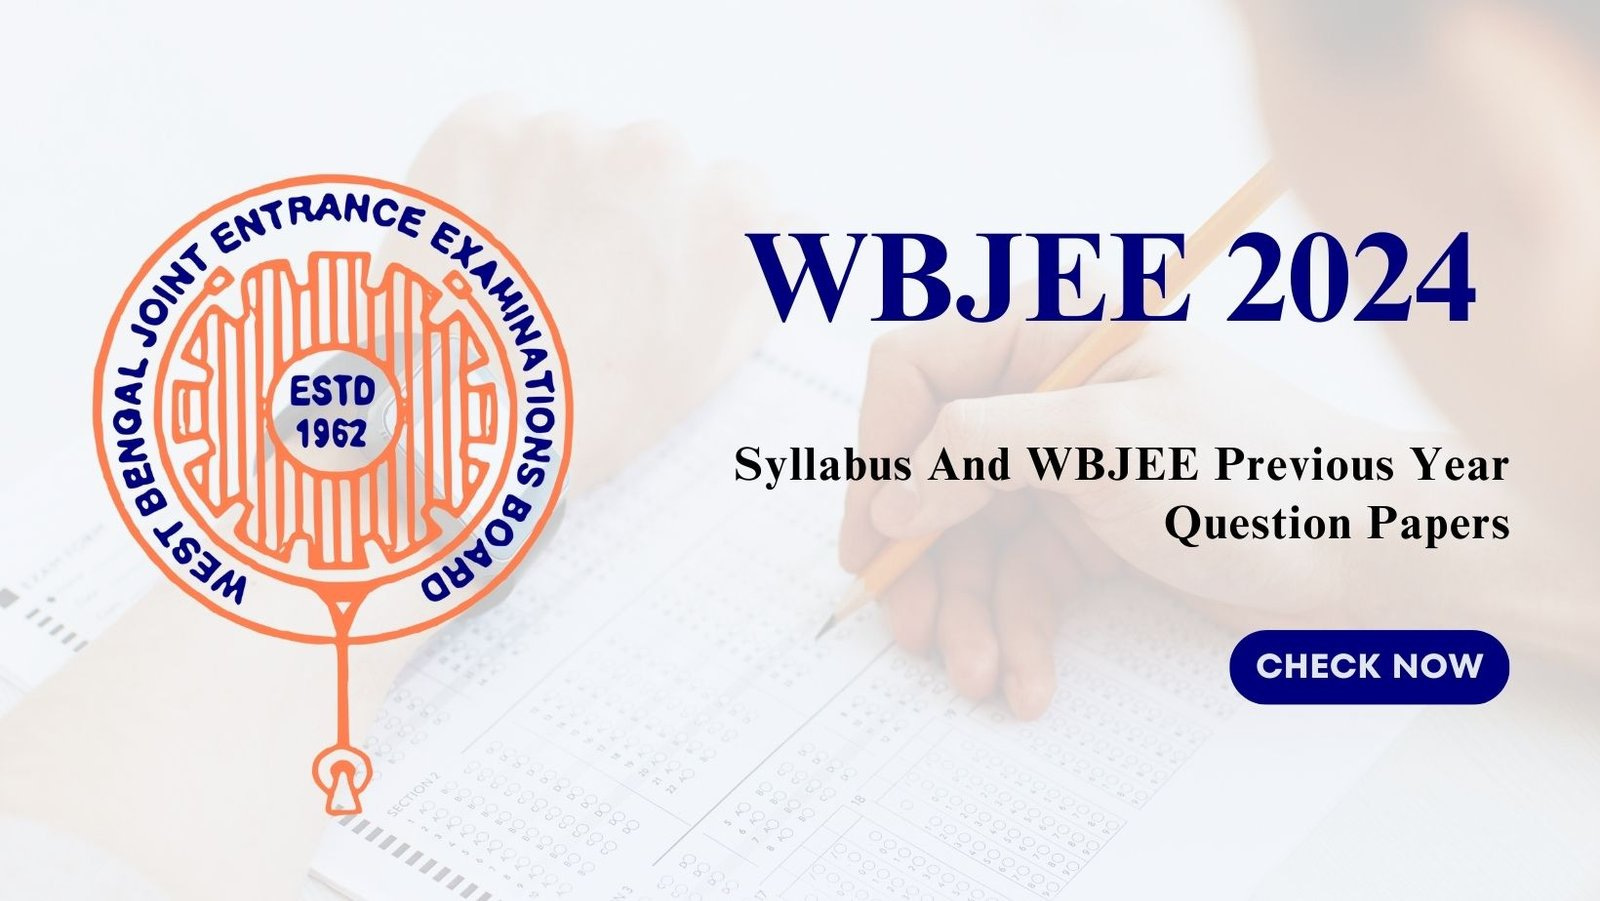 WBJEE 2024 Syllabus And Previous Year Question Papers